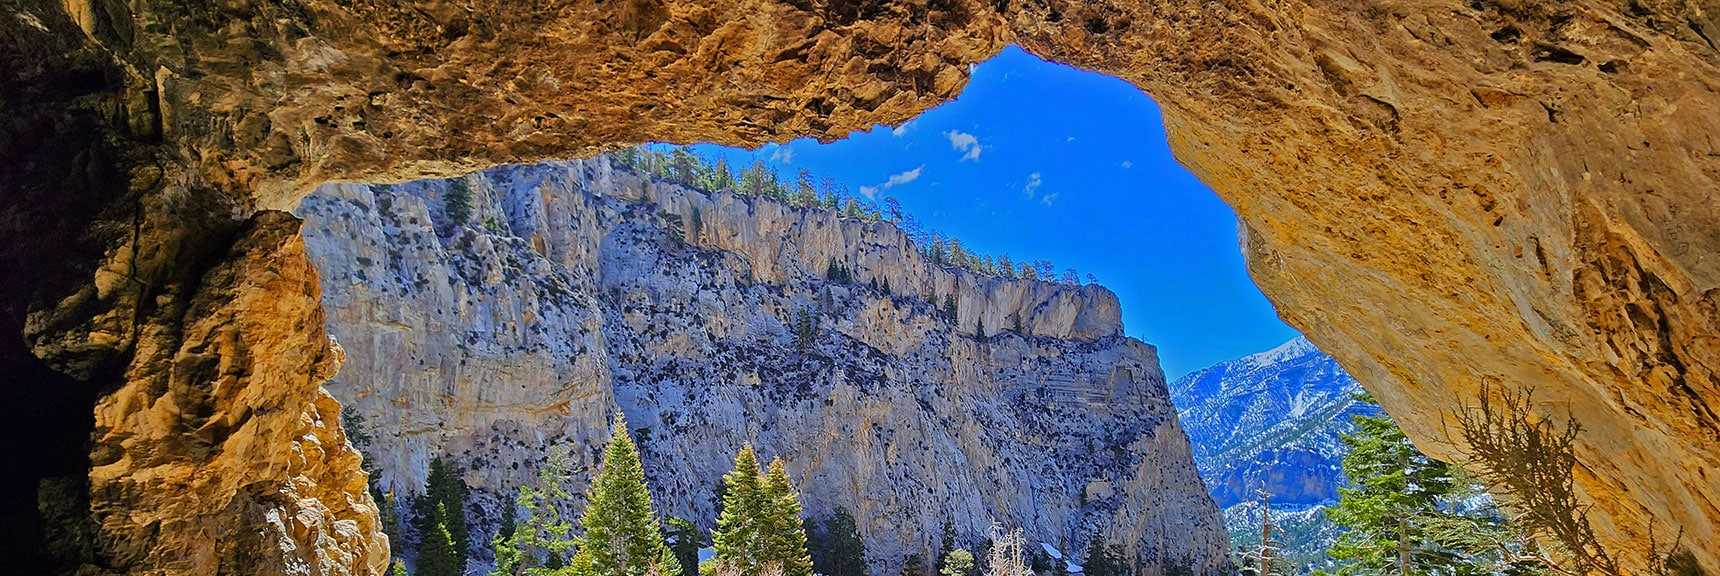 Additional Spectacular Canyon View. Endless Unique Views from the Cave | Mary Jane Falls | Mt. Charleston Wilderness | Spring Mountains, Nevada